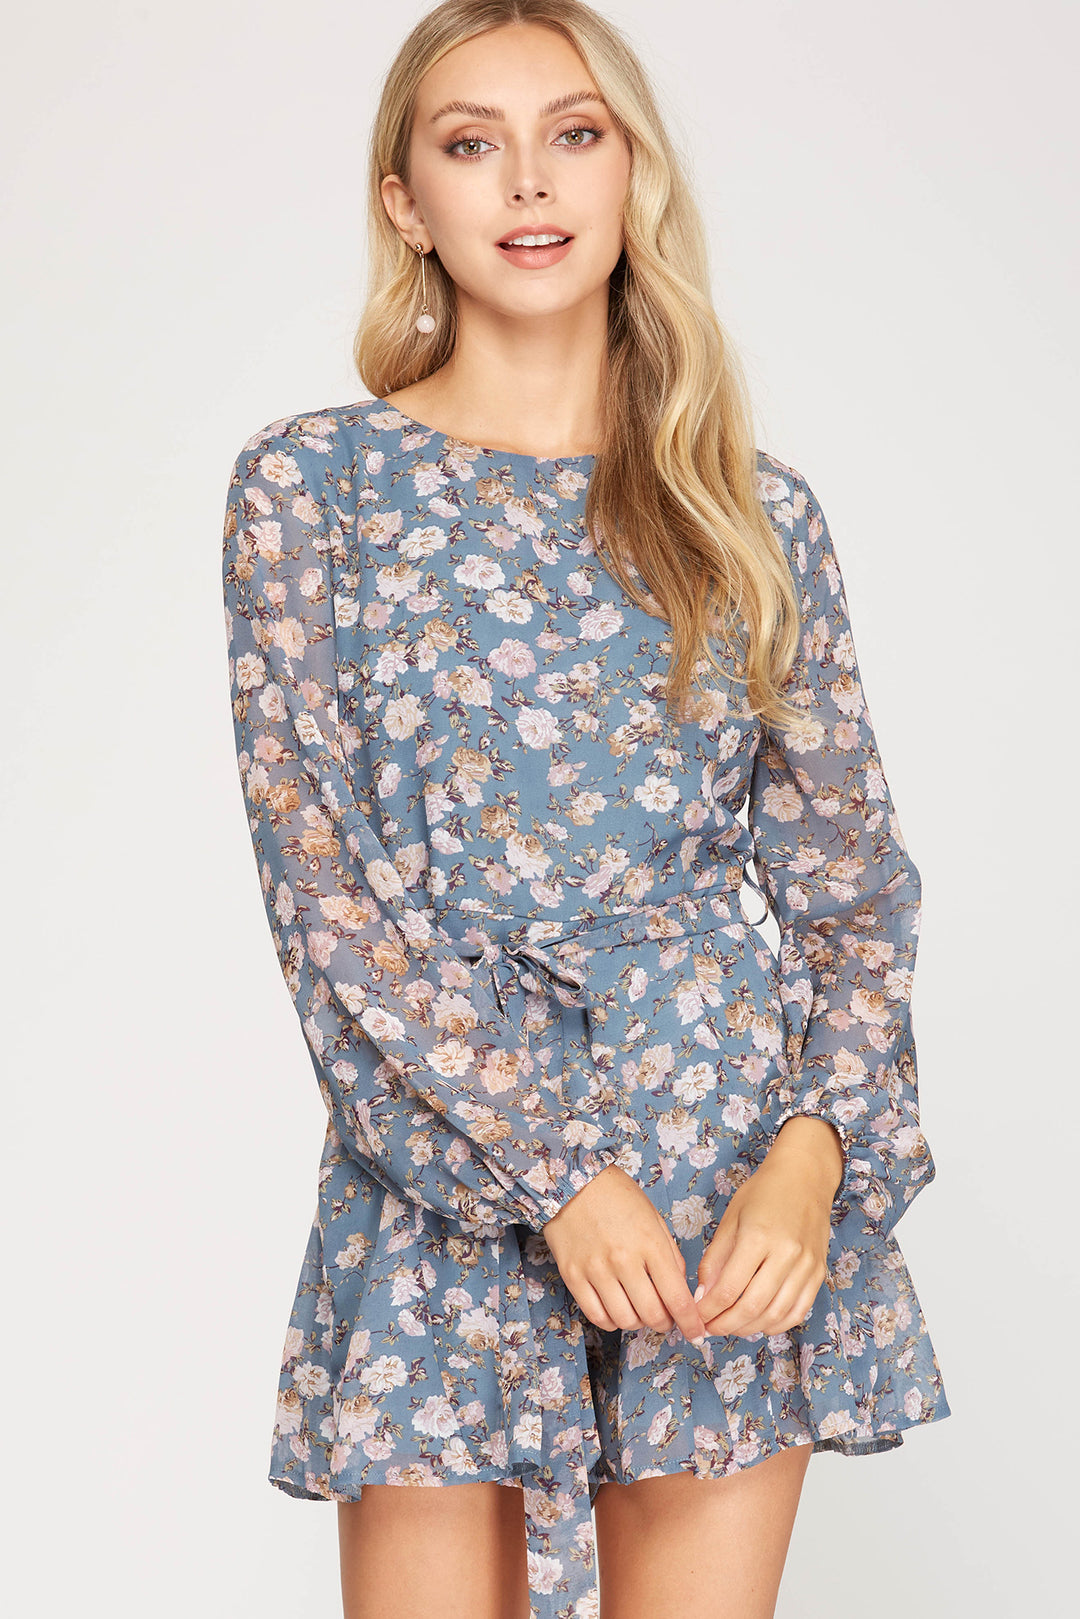 Rylee Floral Print Romper, Dusty Blue-Jumpsuits-Inspired by Justeen-Women's Clothing Boutique in Chicago, Illinois